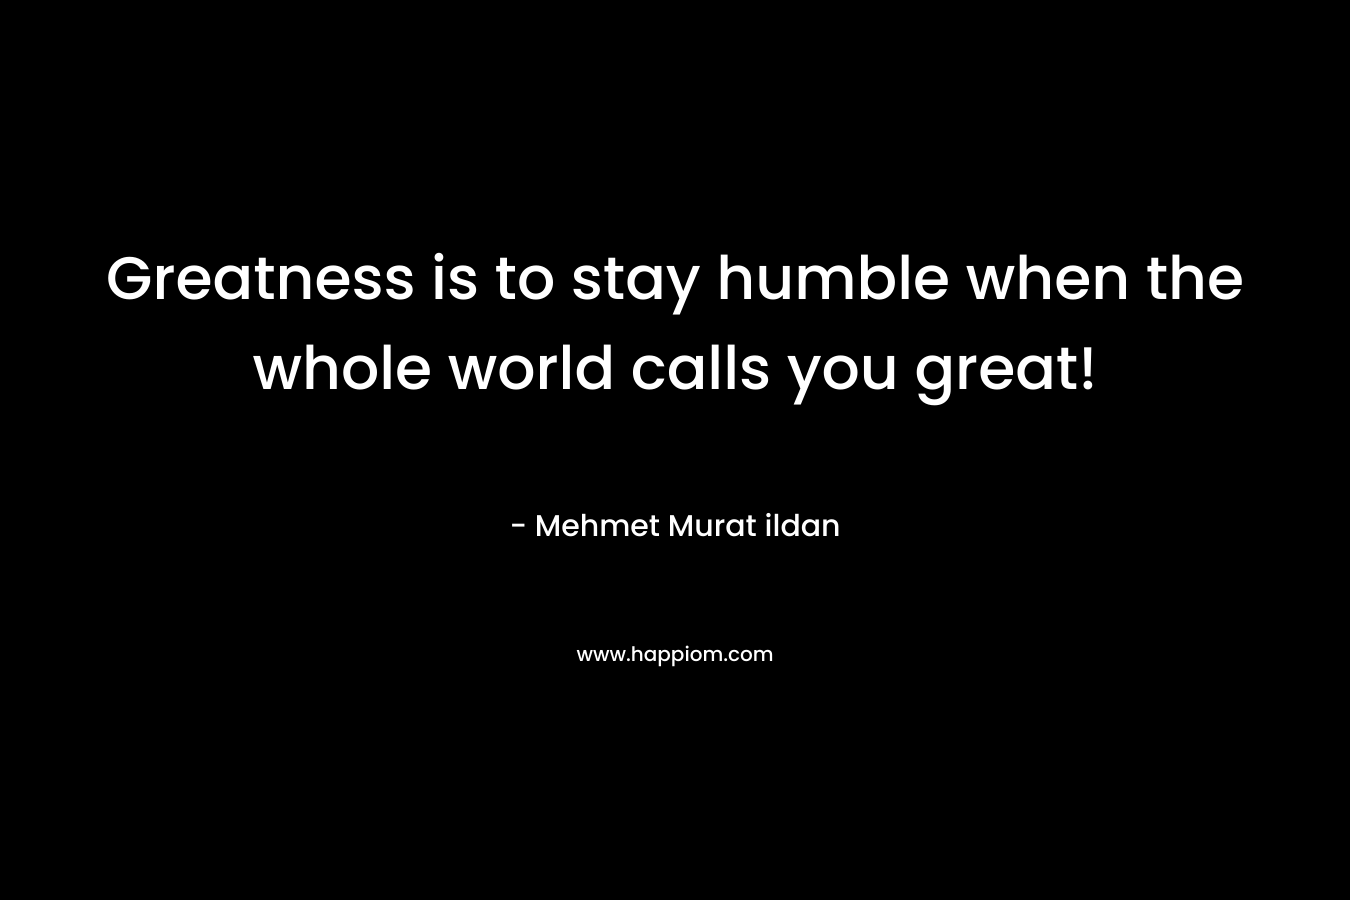 Greatness is to stay humble when the whole world calls you great!